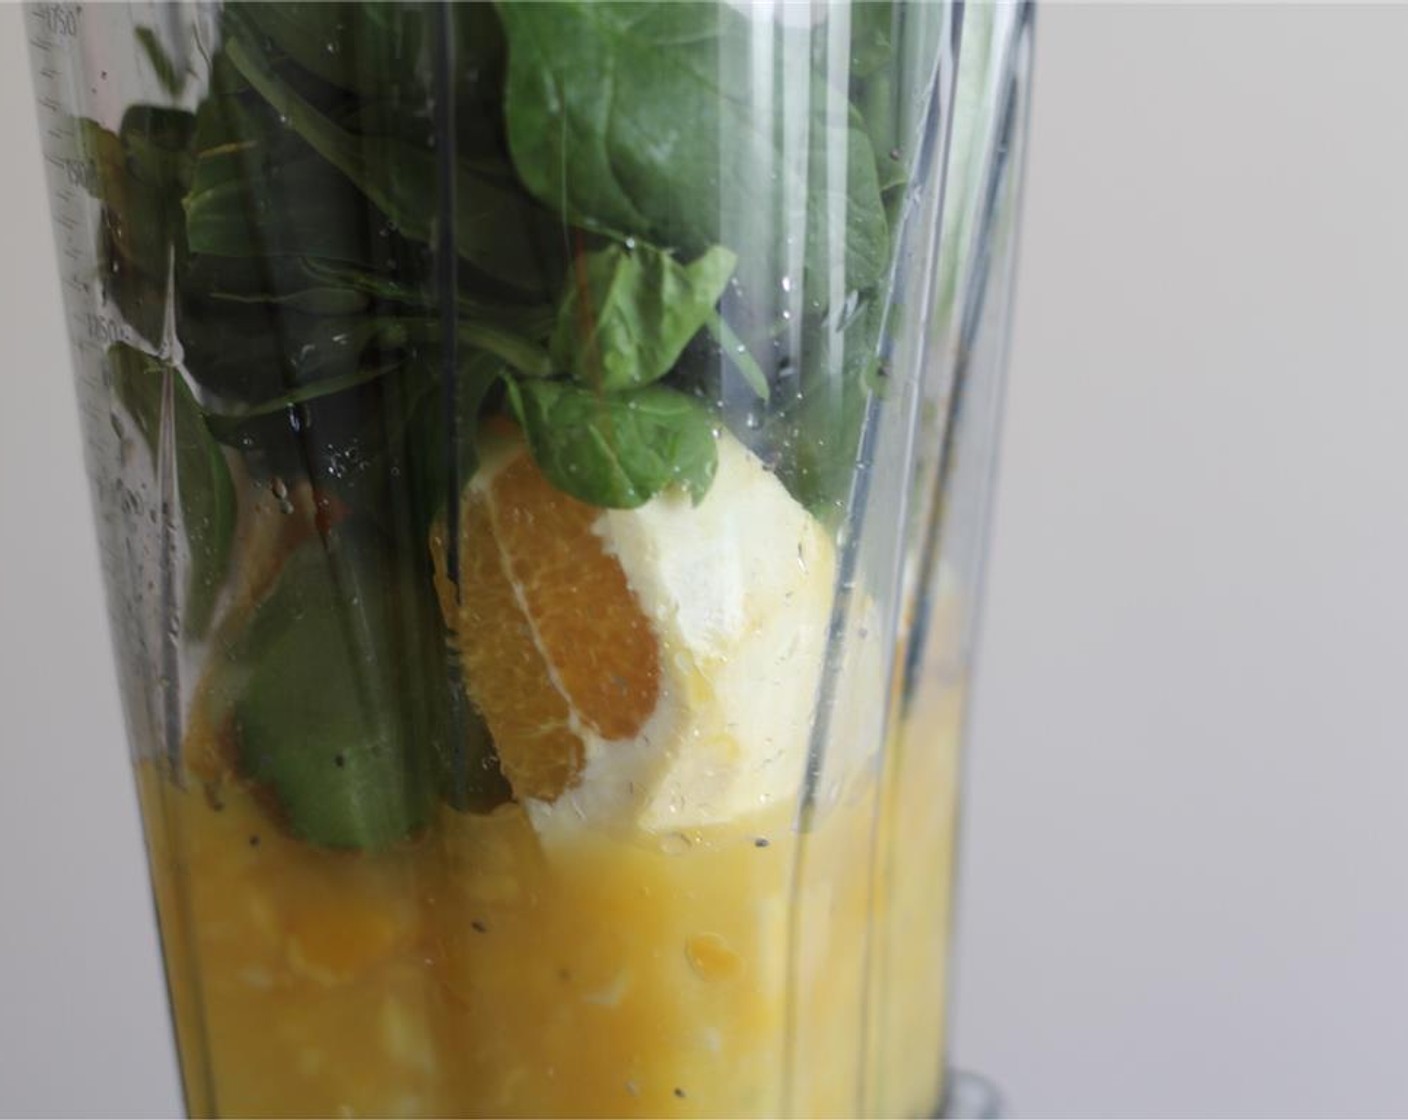 step 1 Pour the Coconut Water (1 cup) into the blender. Add the Frozen Pineapple (1/2 cup), Frozen Mangoes (1/2 cup), Orange (1), Kiwifruit (1), Fresh Spinach (1 cup), and Chia Seeds (2 Tbsp).